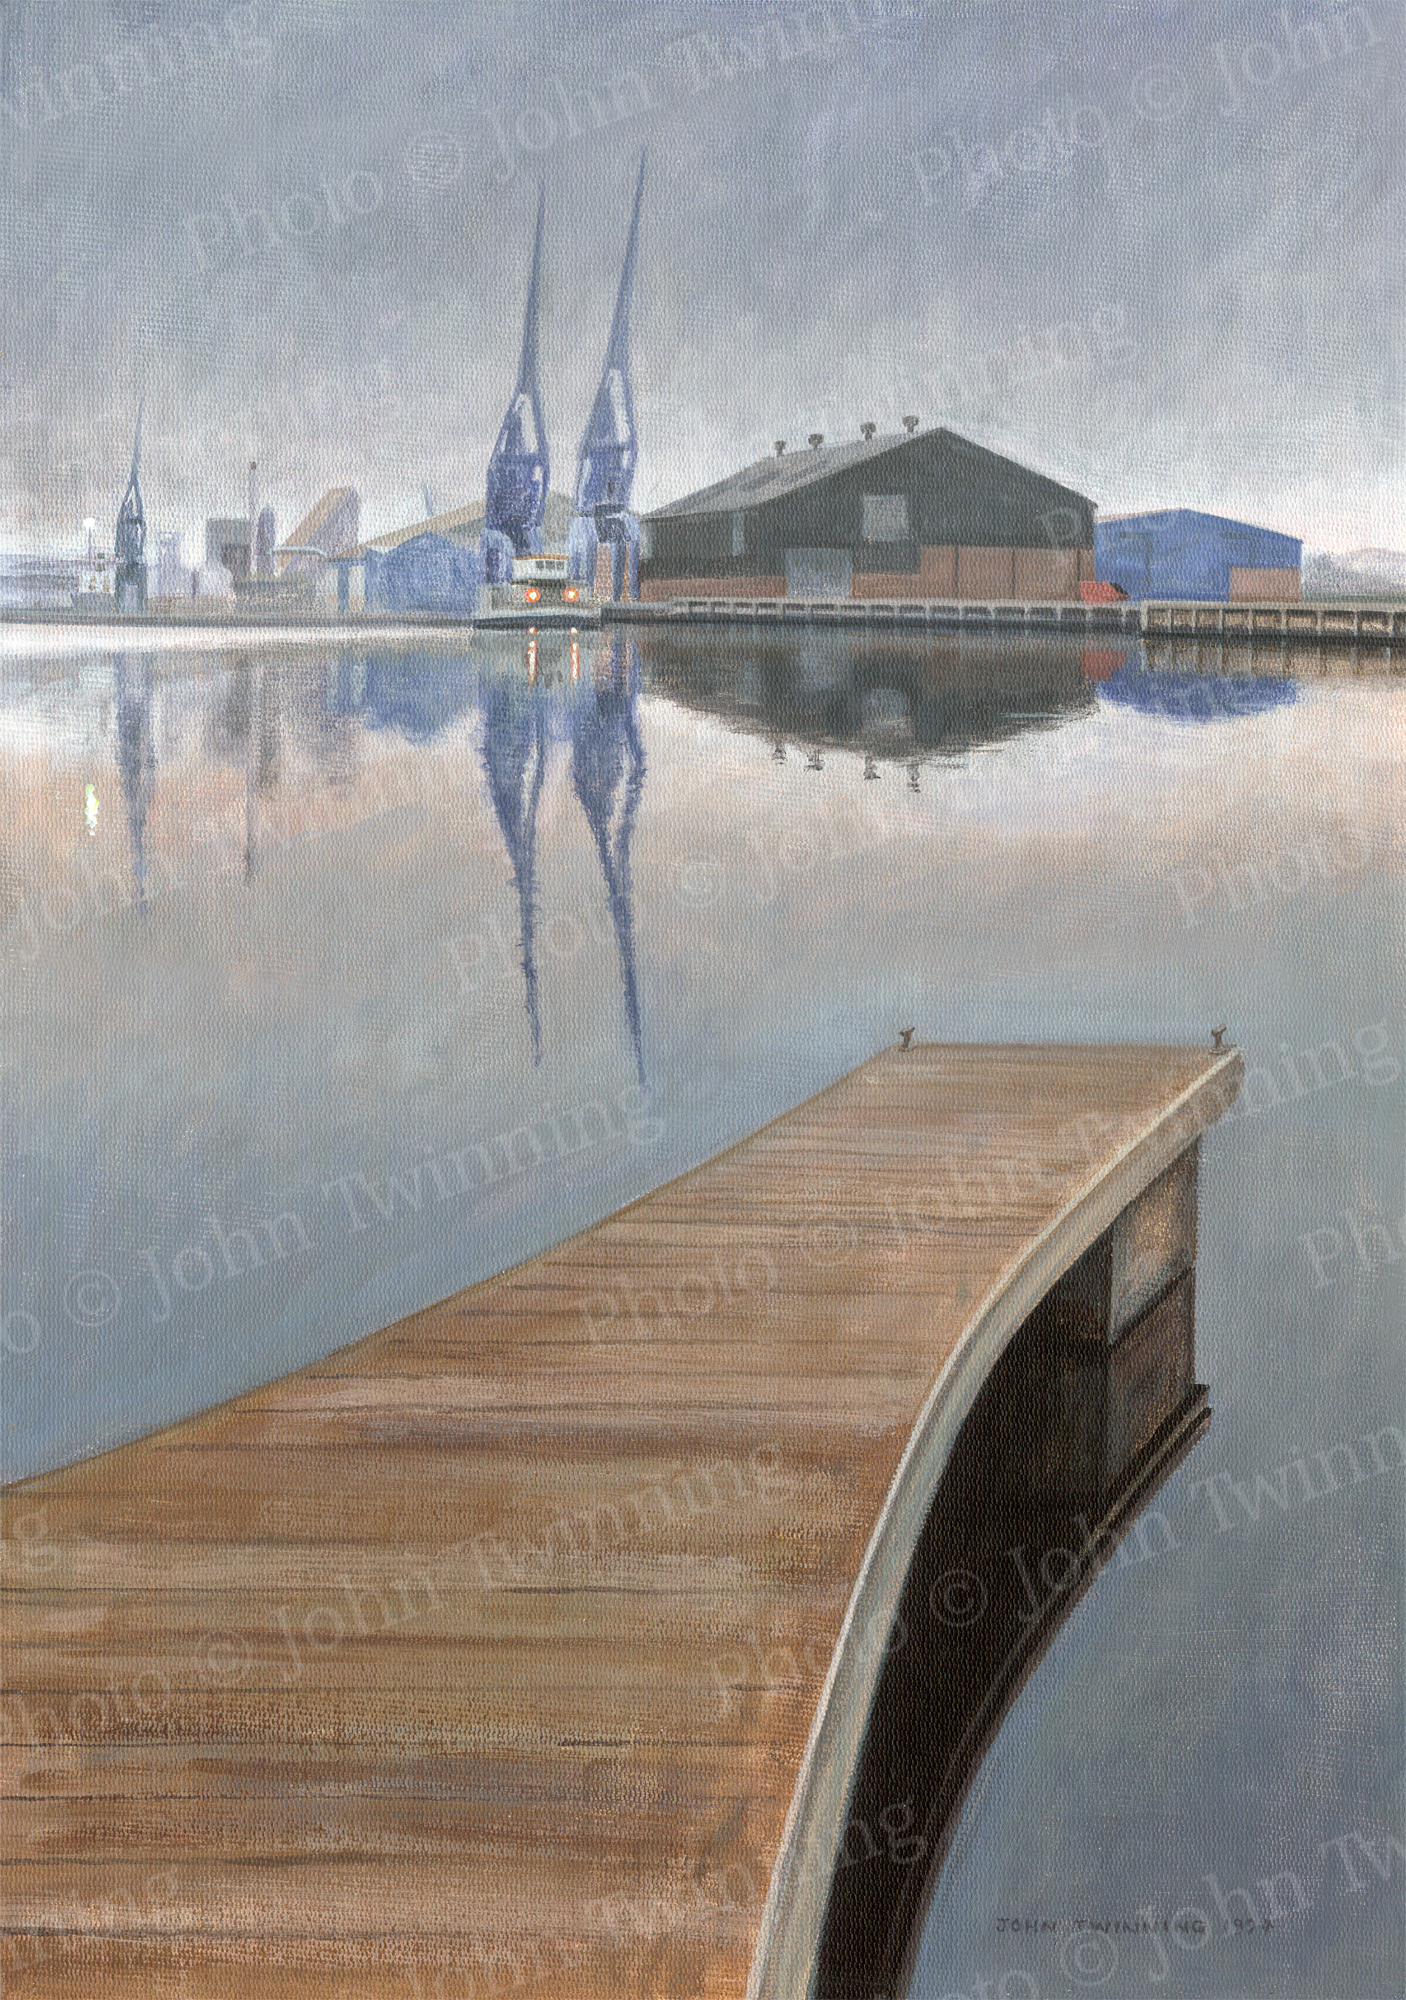 ‘Misty Morning On The Jetty, Ipswich Docks, Suffolk’ – art print from a marine/maritime painting